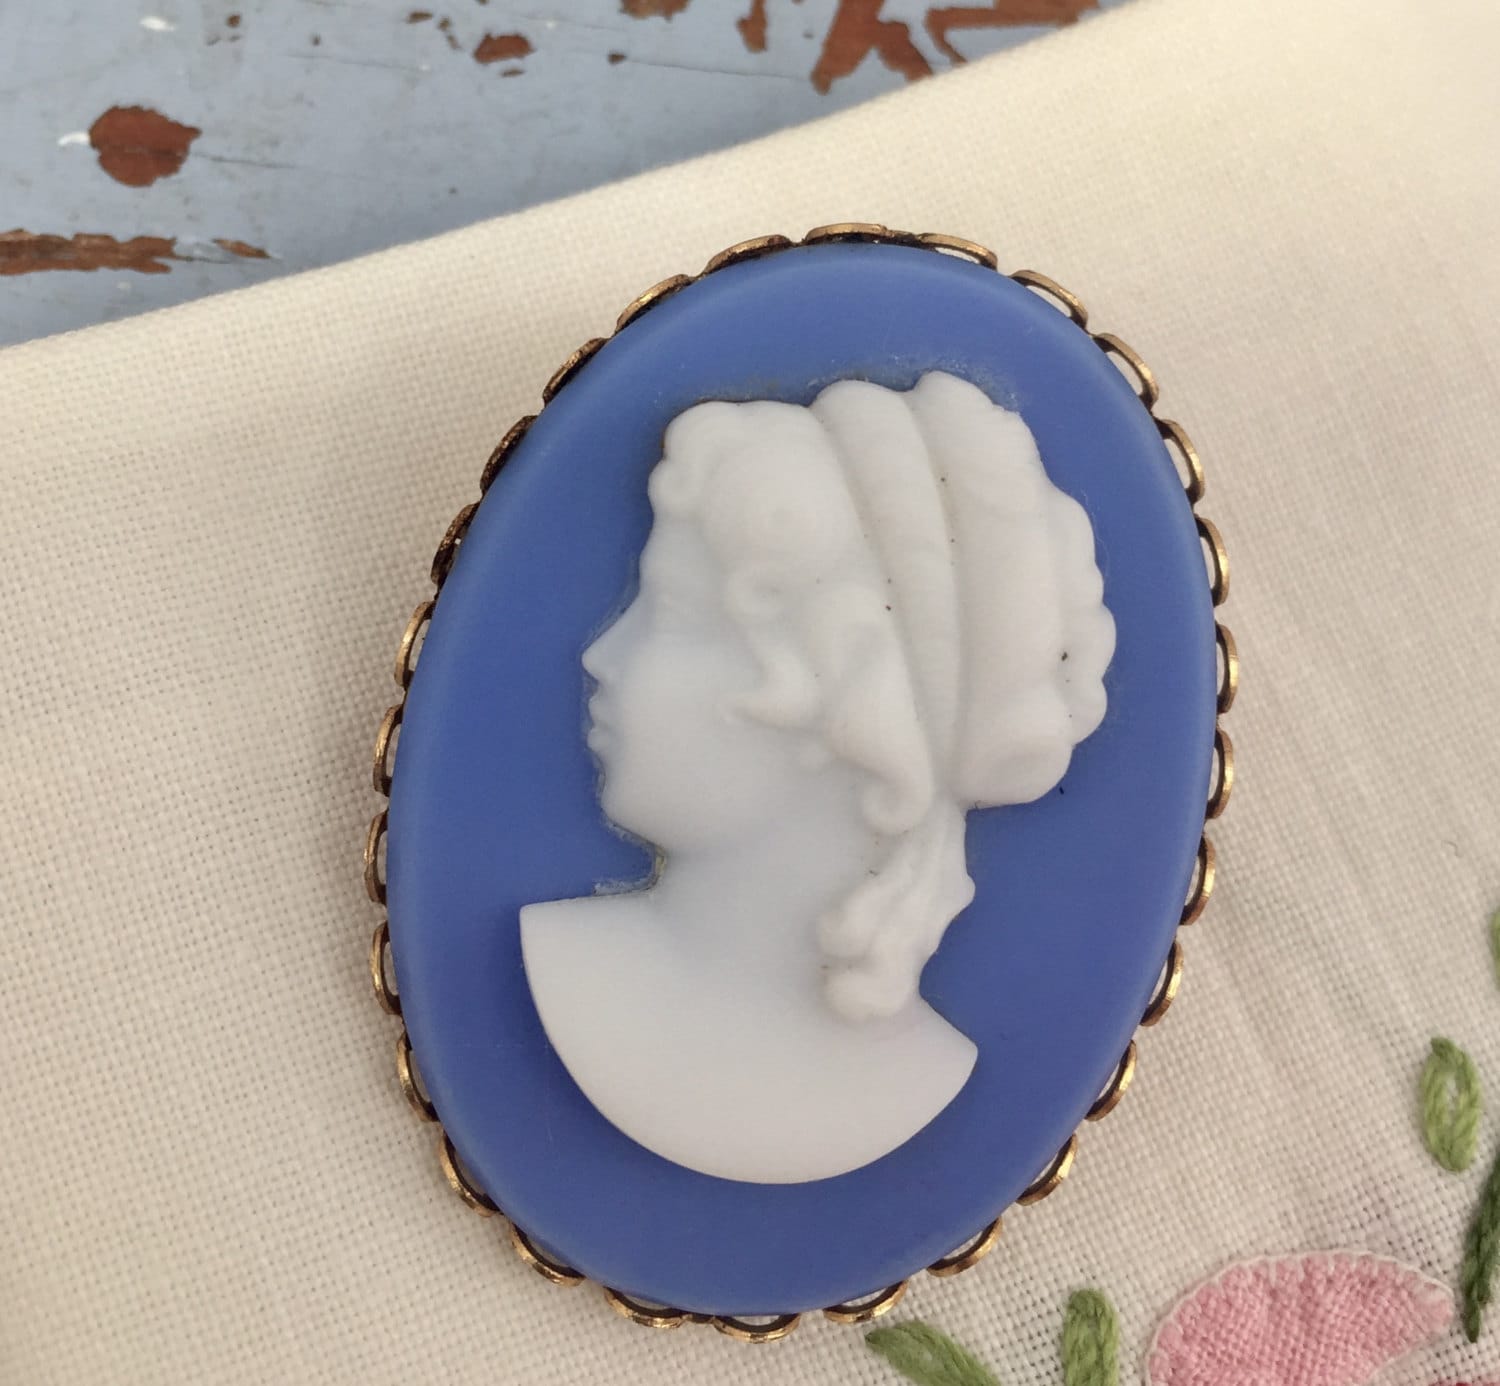 Vintage Cameo Brooch Pin, Blue and White Cameo, 1960s Victorian Revival ...